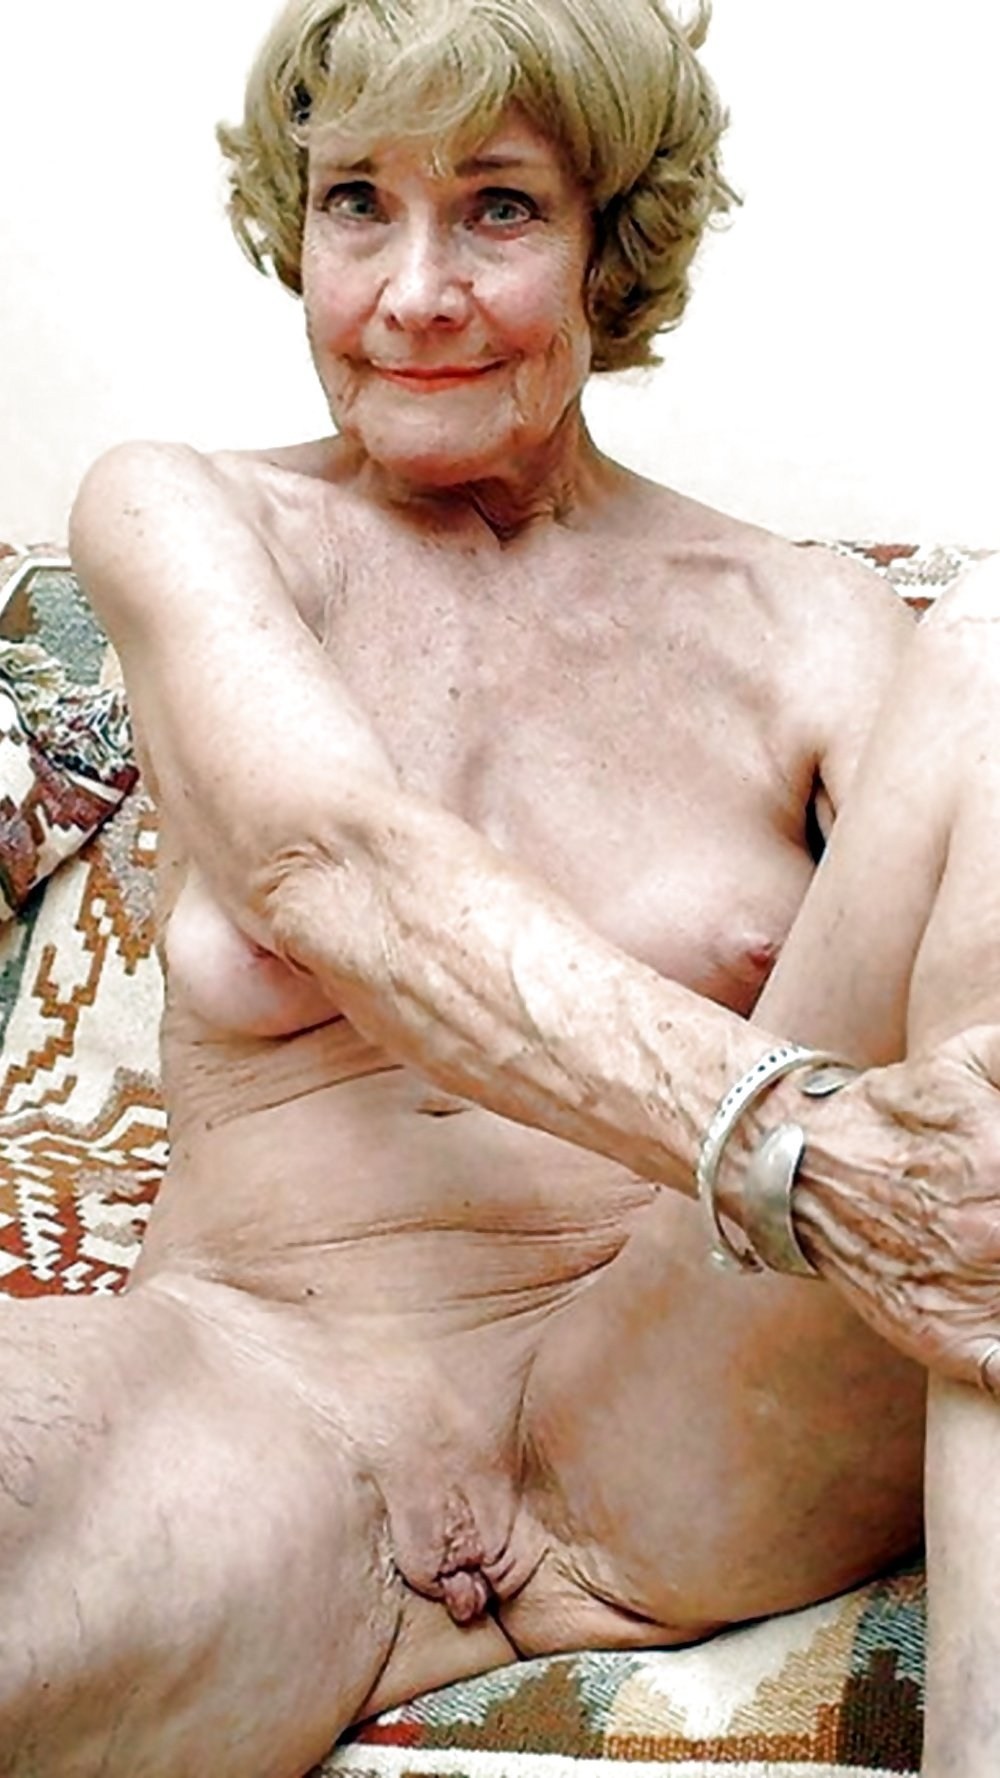 chris welter recommends very old naked women pic